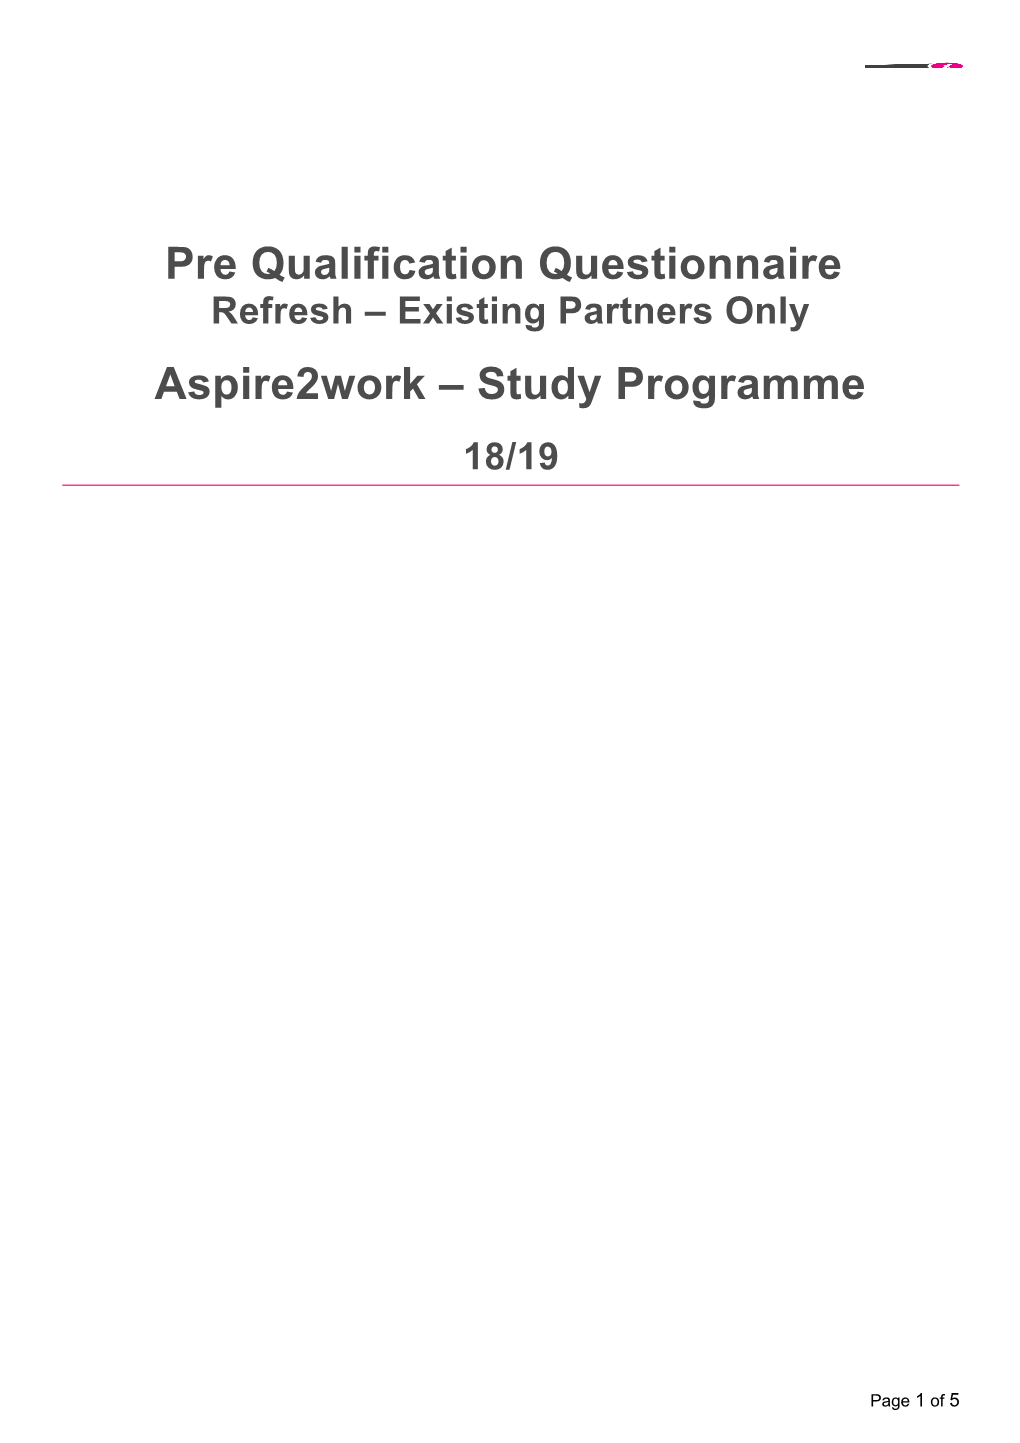 Pre Qualification Questionnaire Refresh Existing Partners Only